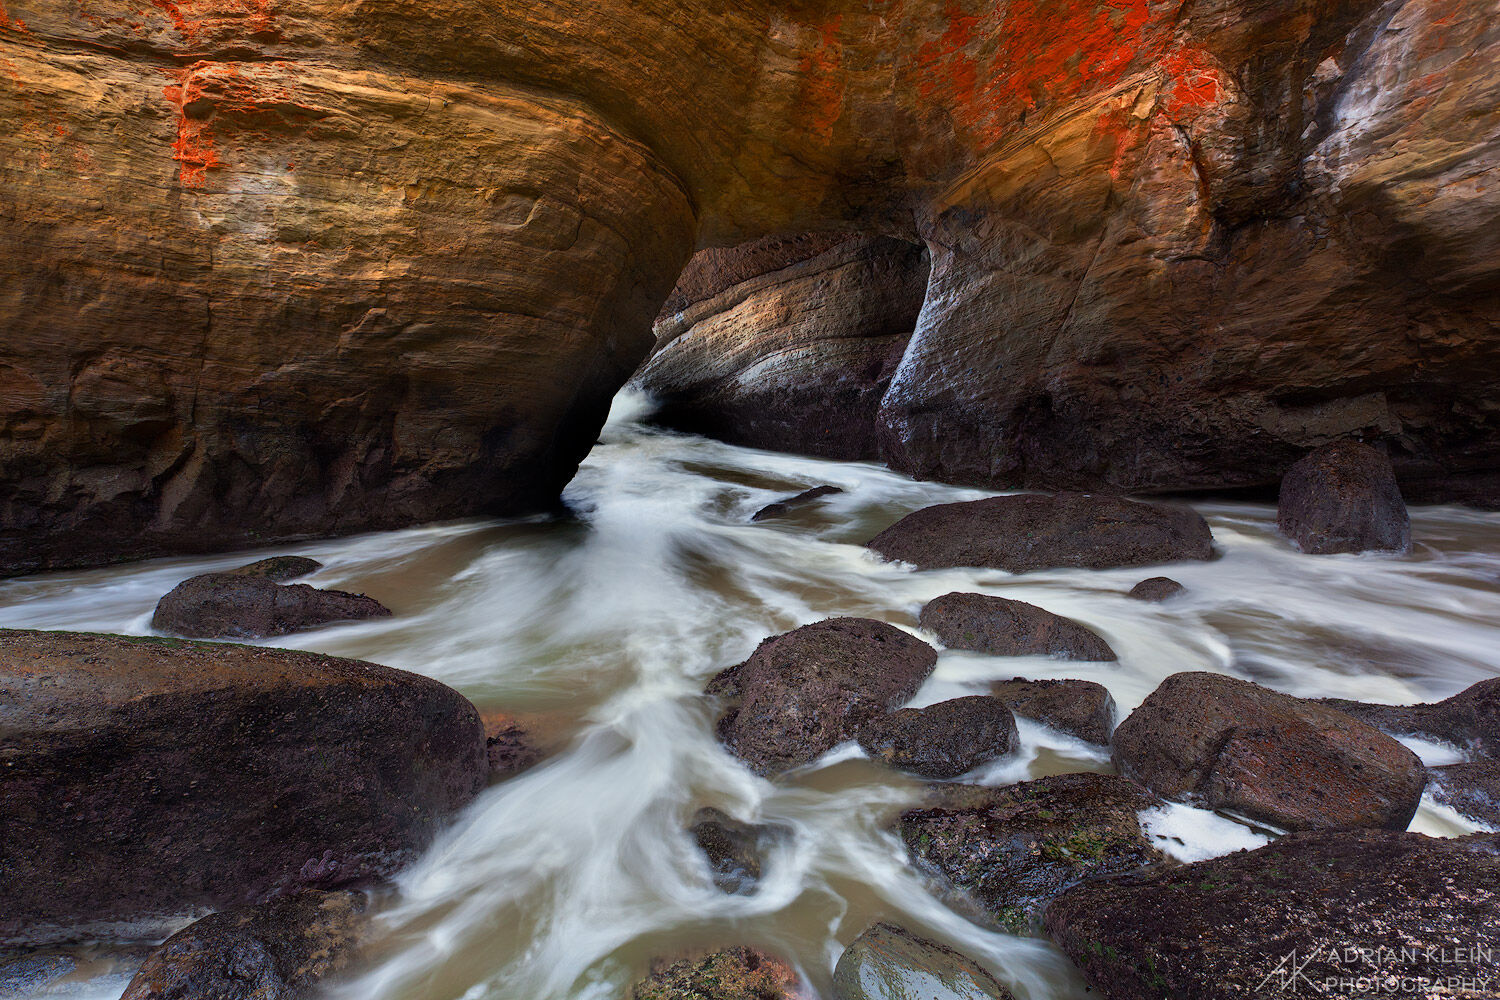 Standing inside the Devil's Cauldron at the Devil's Punchbowl State Park along the Central Oregon Coast. Waves roll in and out...